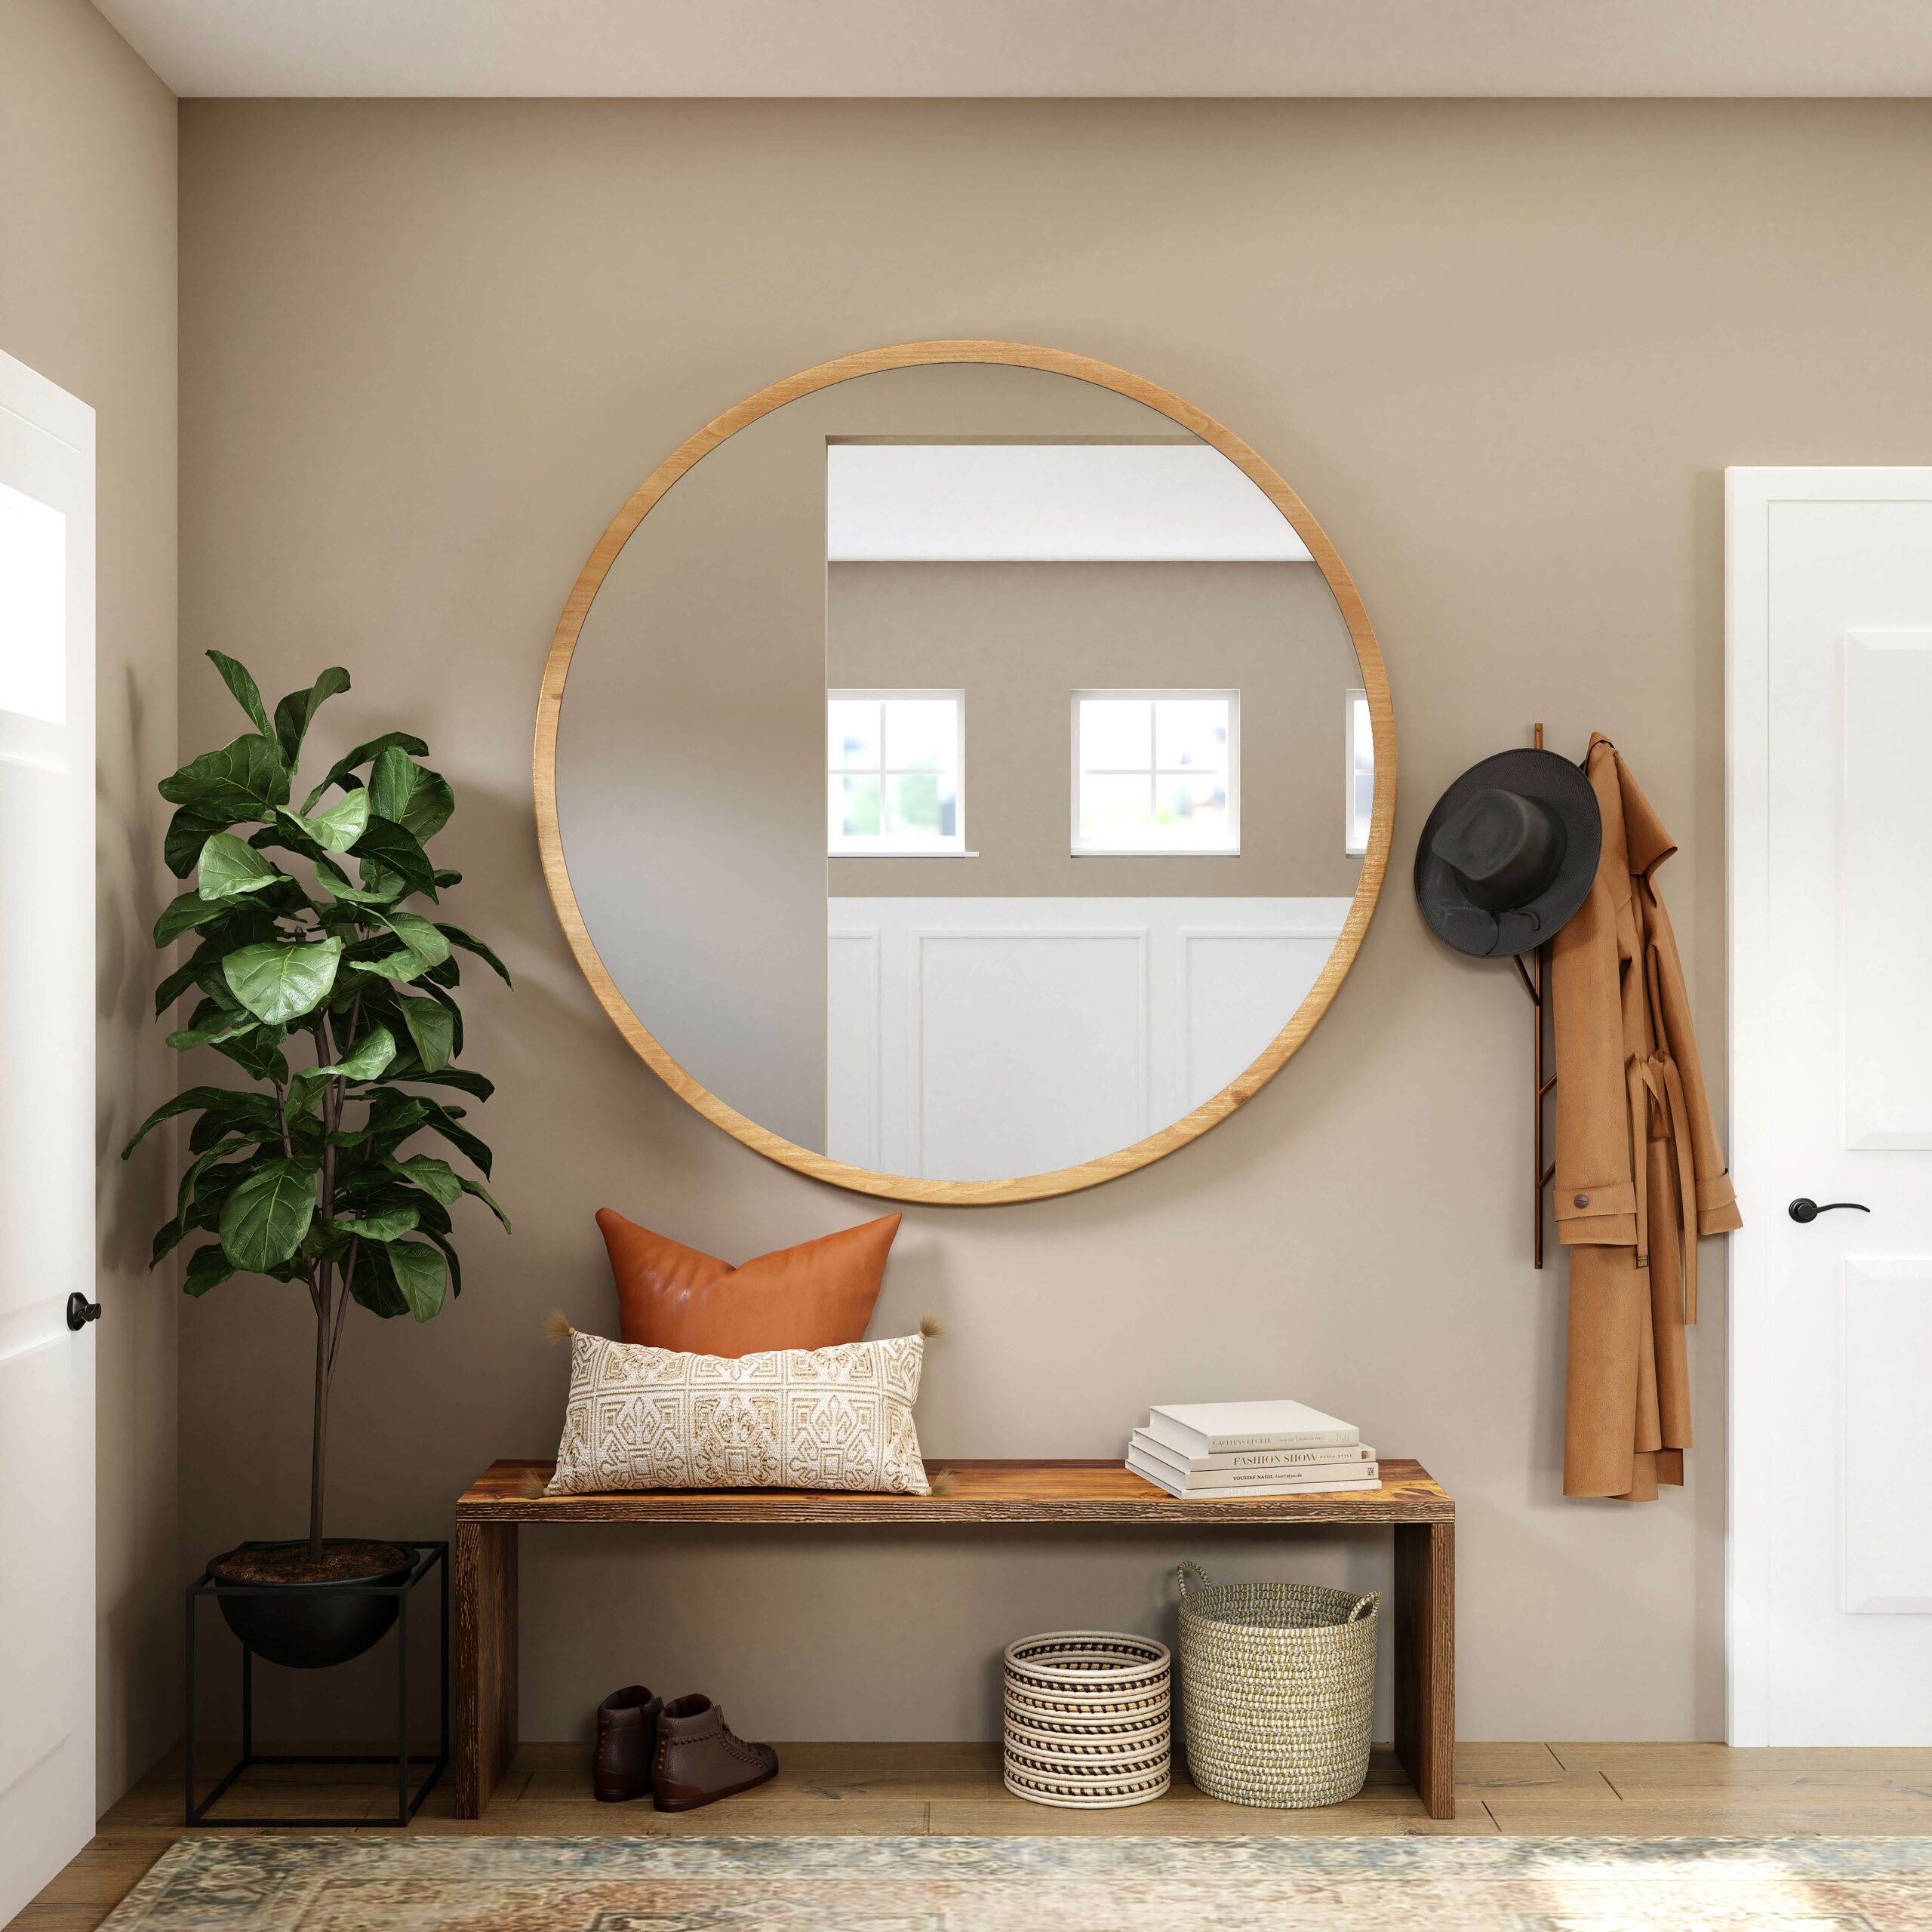 Large mirror in an entry to reflect natural light without making the wall feel cluttered.